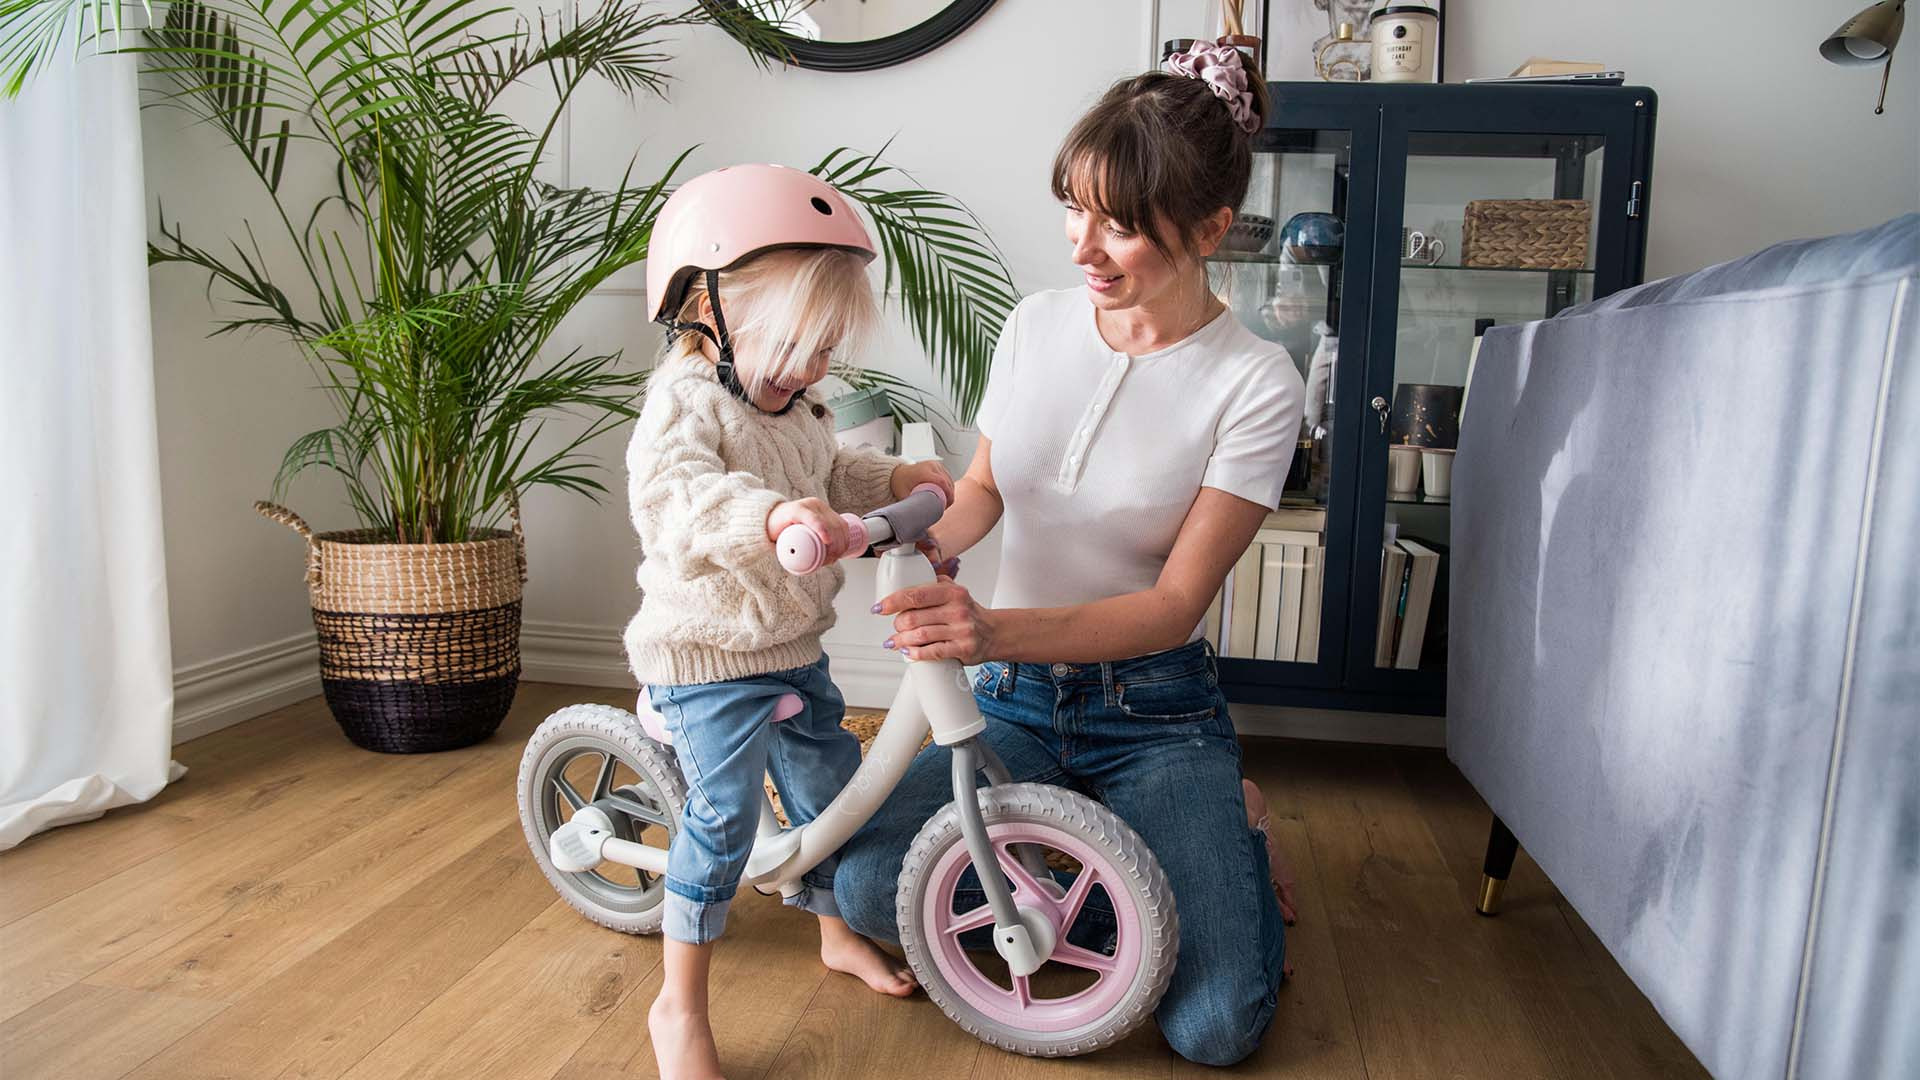 What kind of helmet for a Child will be appropriate? What should I pay attention to when buying one?